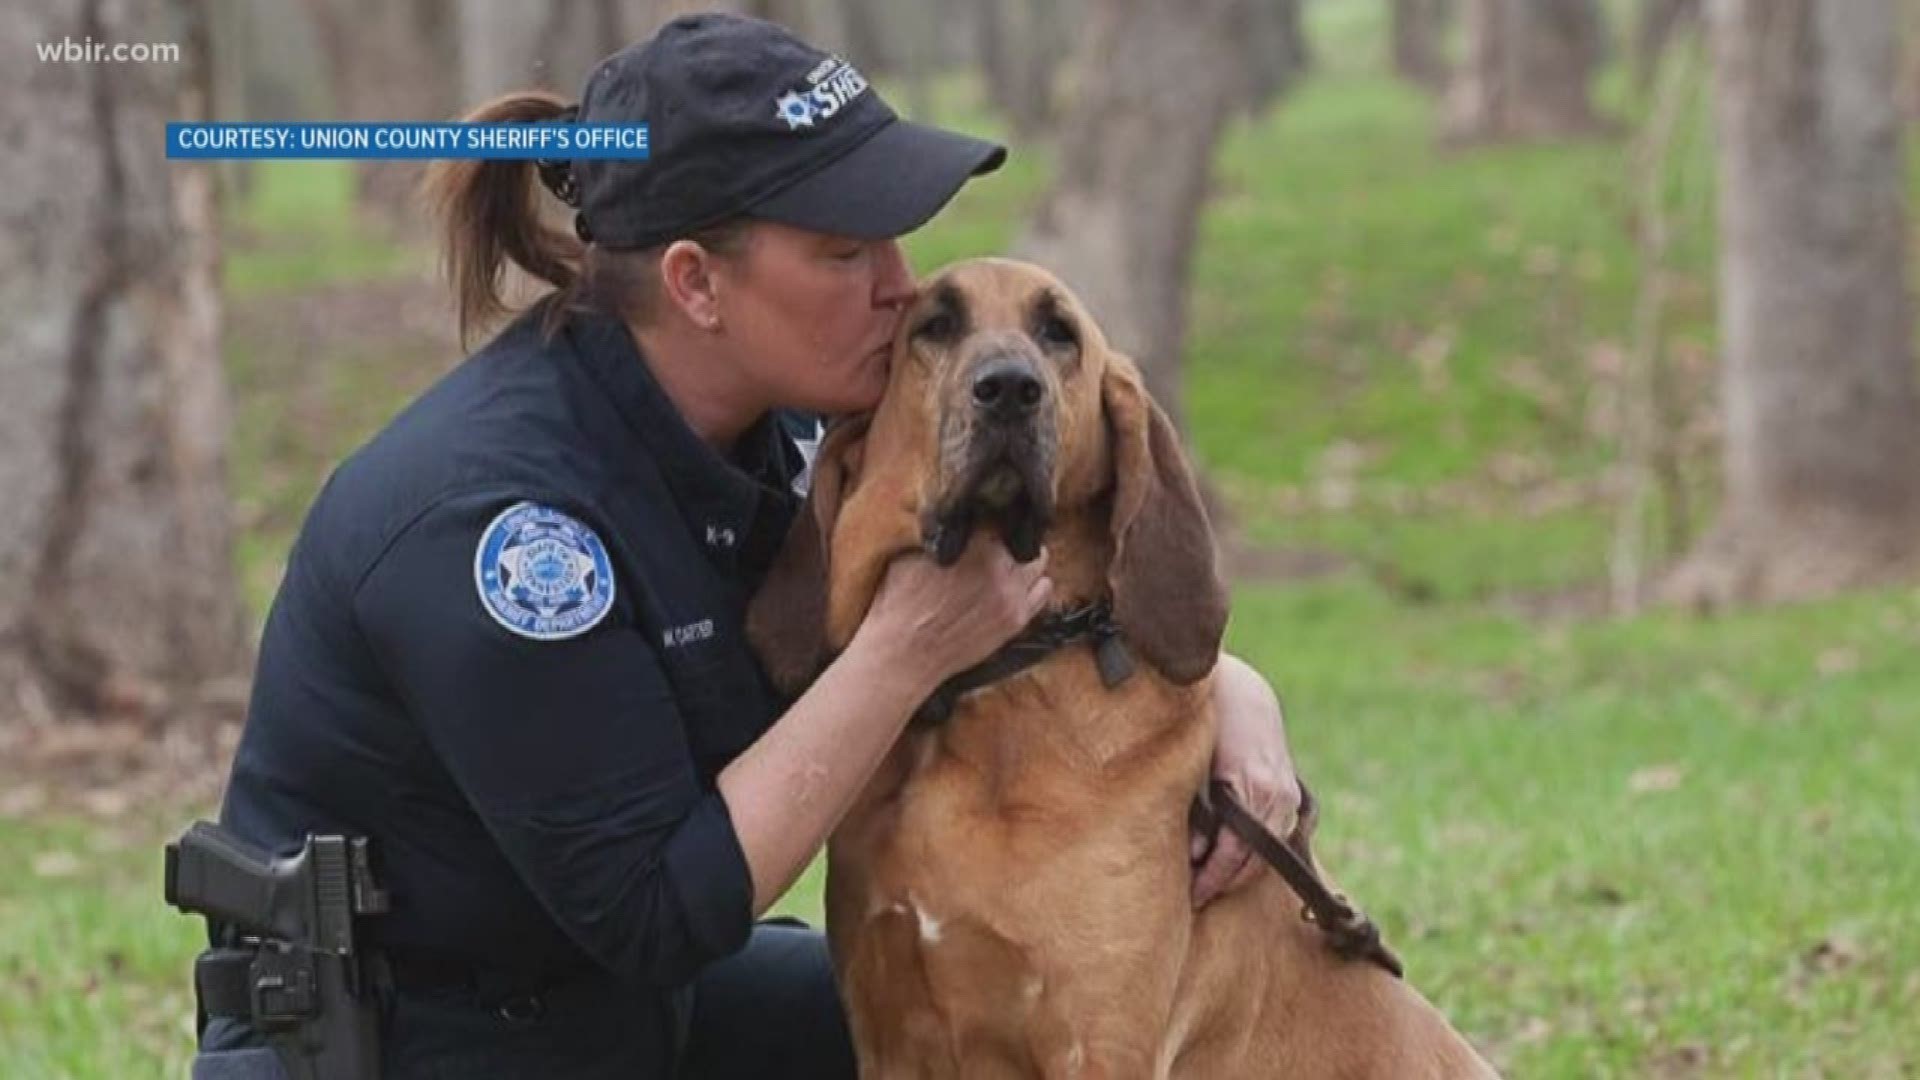 Josey was a 7 year old bloodhound who worked with the sheriff's office. She died a week ago, from what vets say was a previously unknown medical condition.